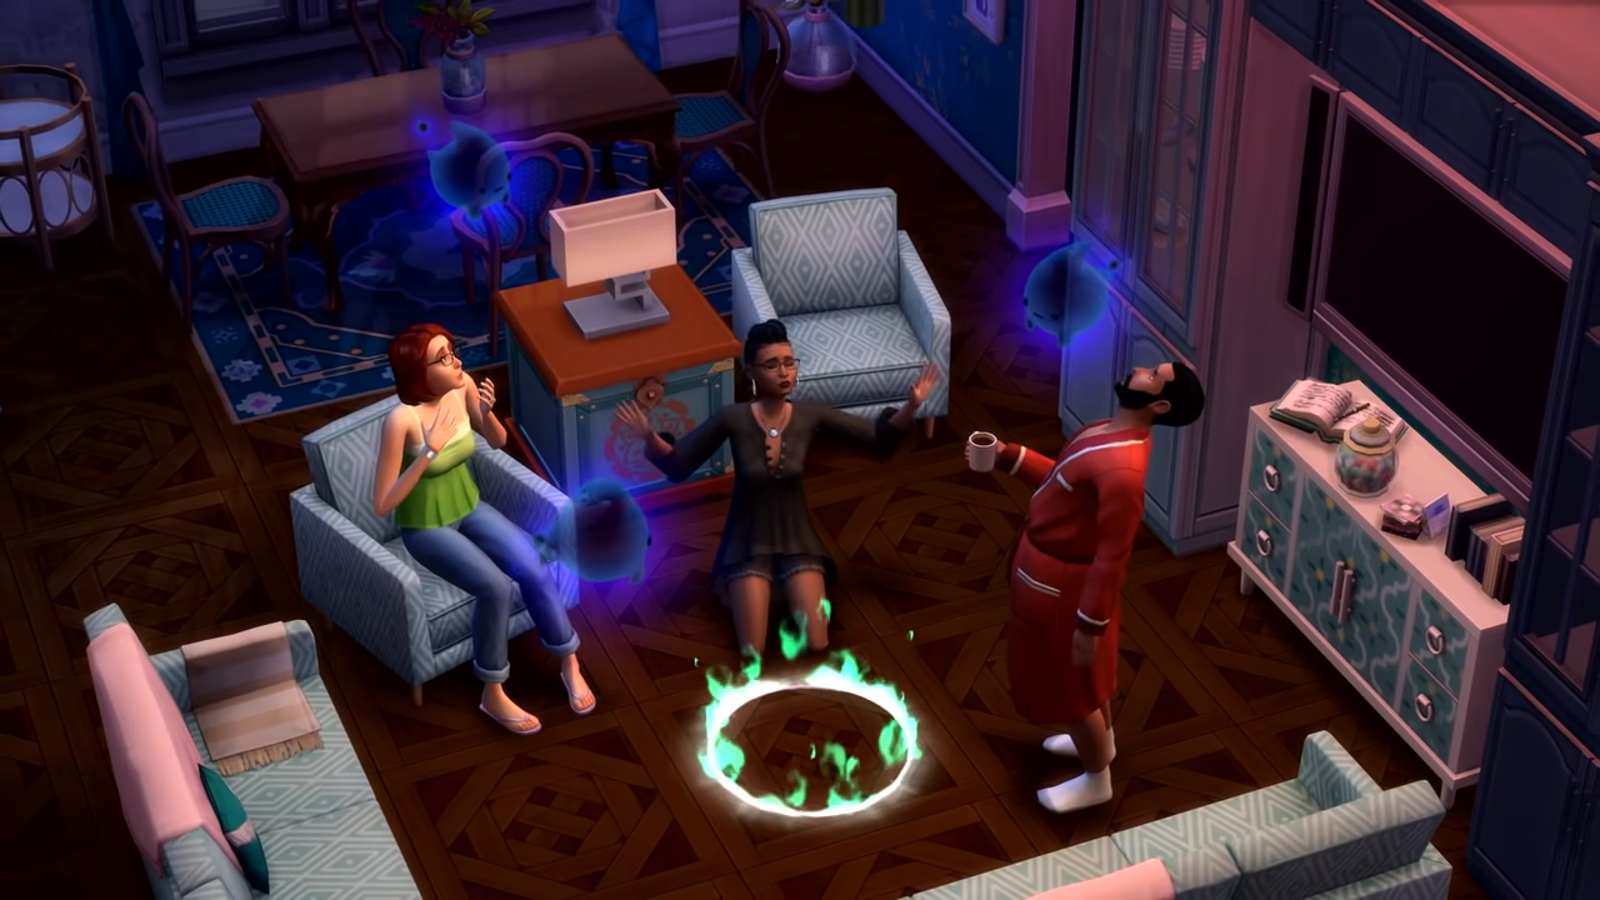 https://assetsio.reedpopcdn.com/the-sims-4-paranormal-investigation-at-the-pancakes-house.png?width=1600&height=900&fit=crop&quality=100&format=png&enable=upscale&auto=webp